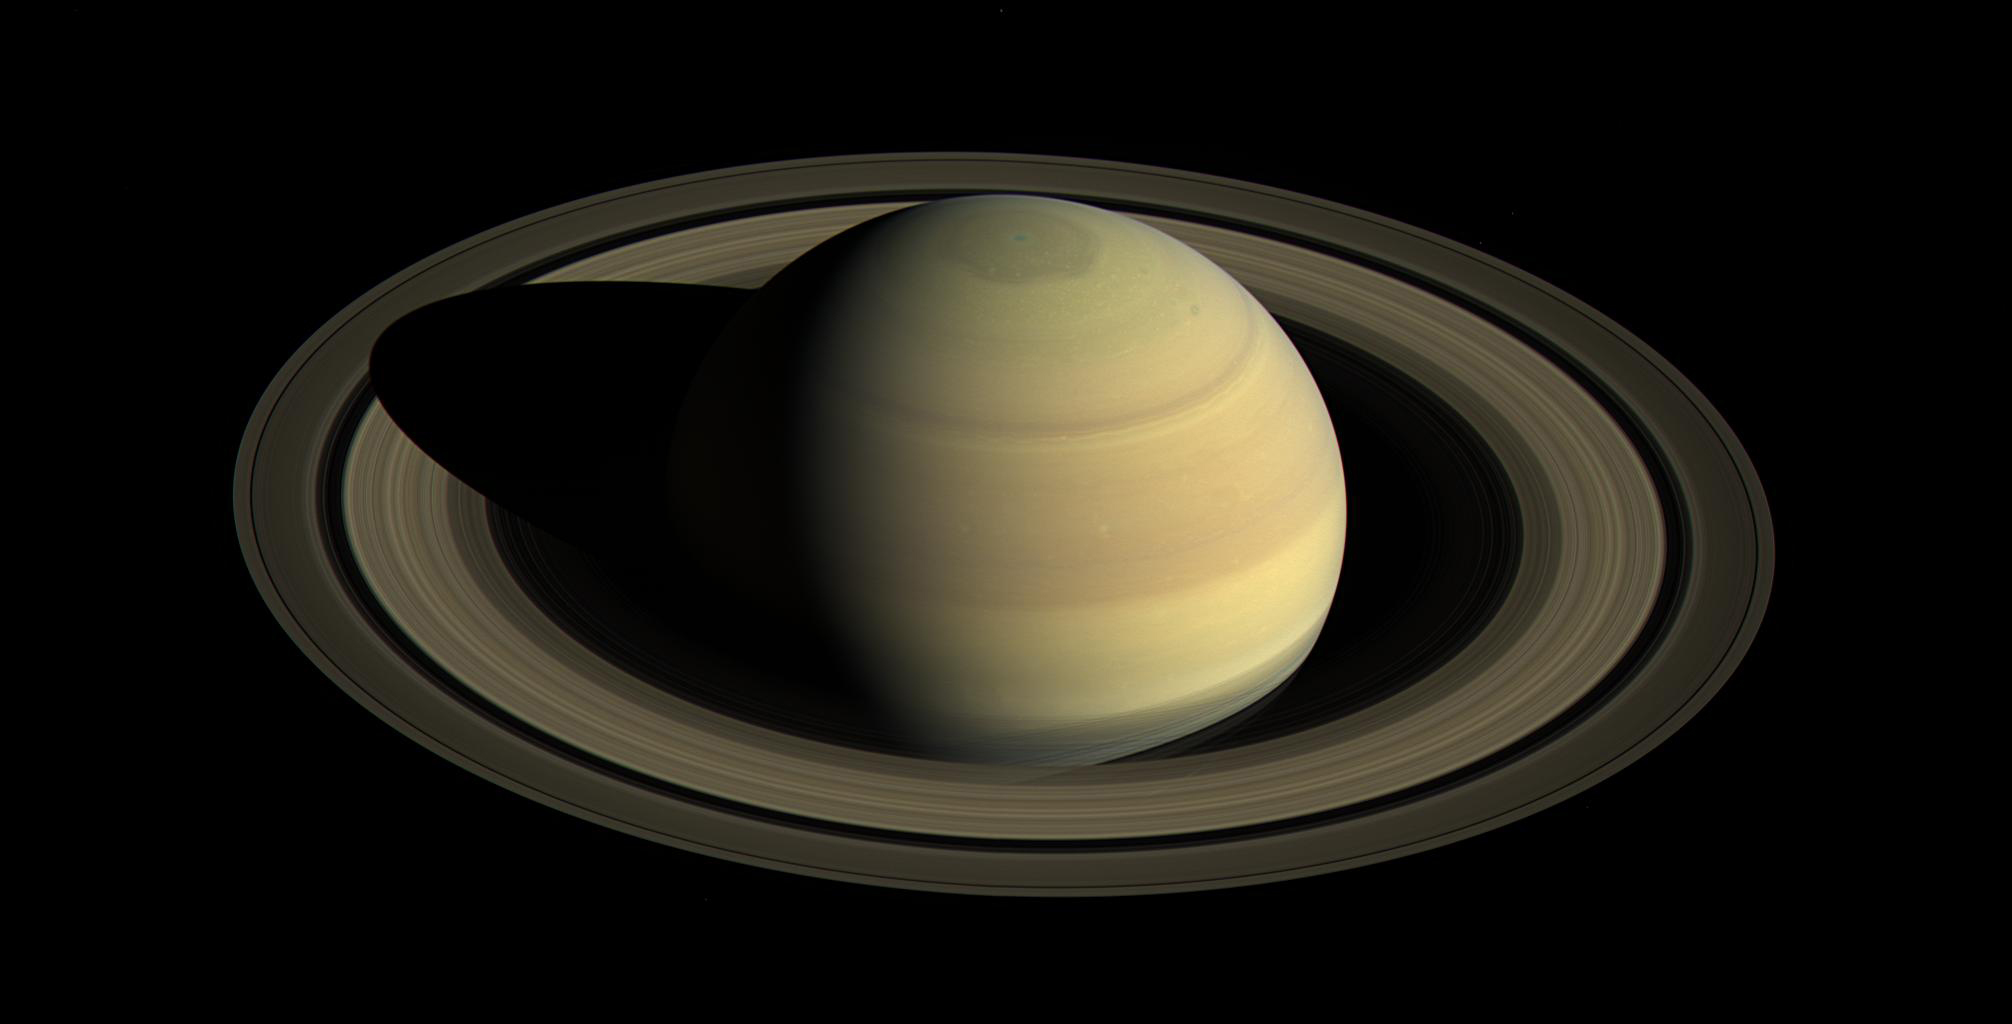 Full view of Saturn and its rings.